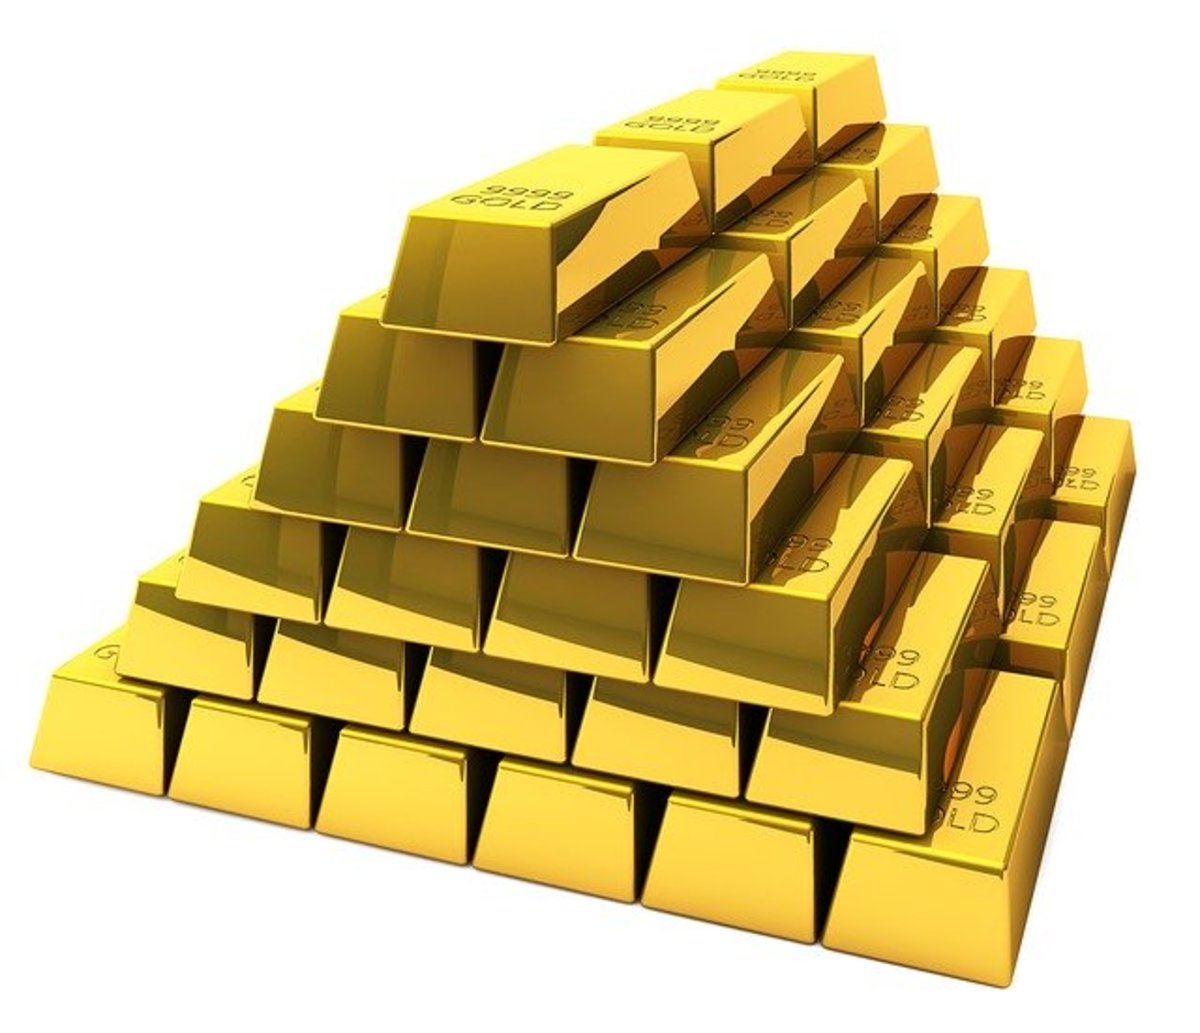 Mind-Blowing Types of Gold Other Than Bright Yellow!